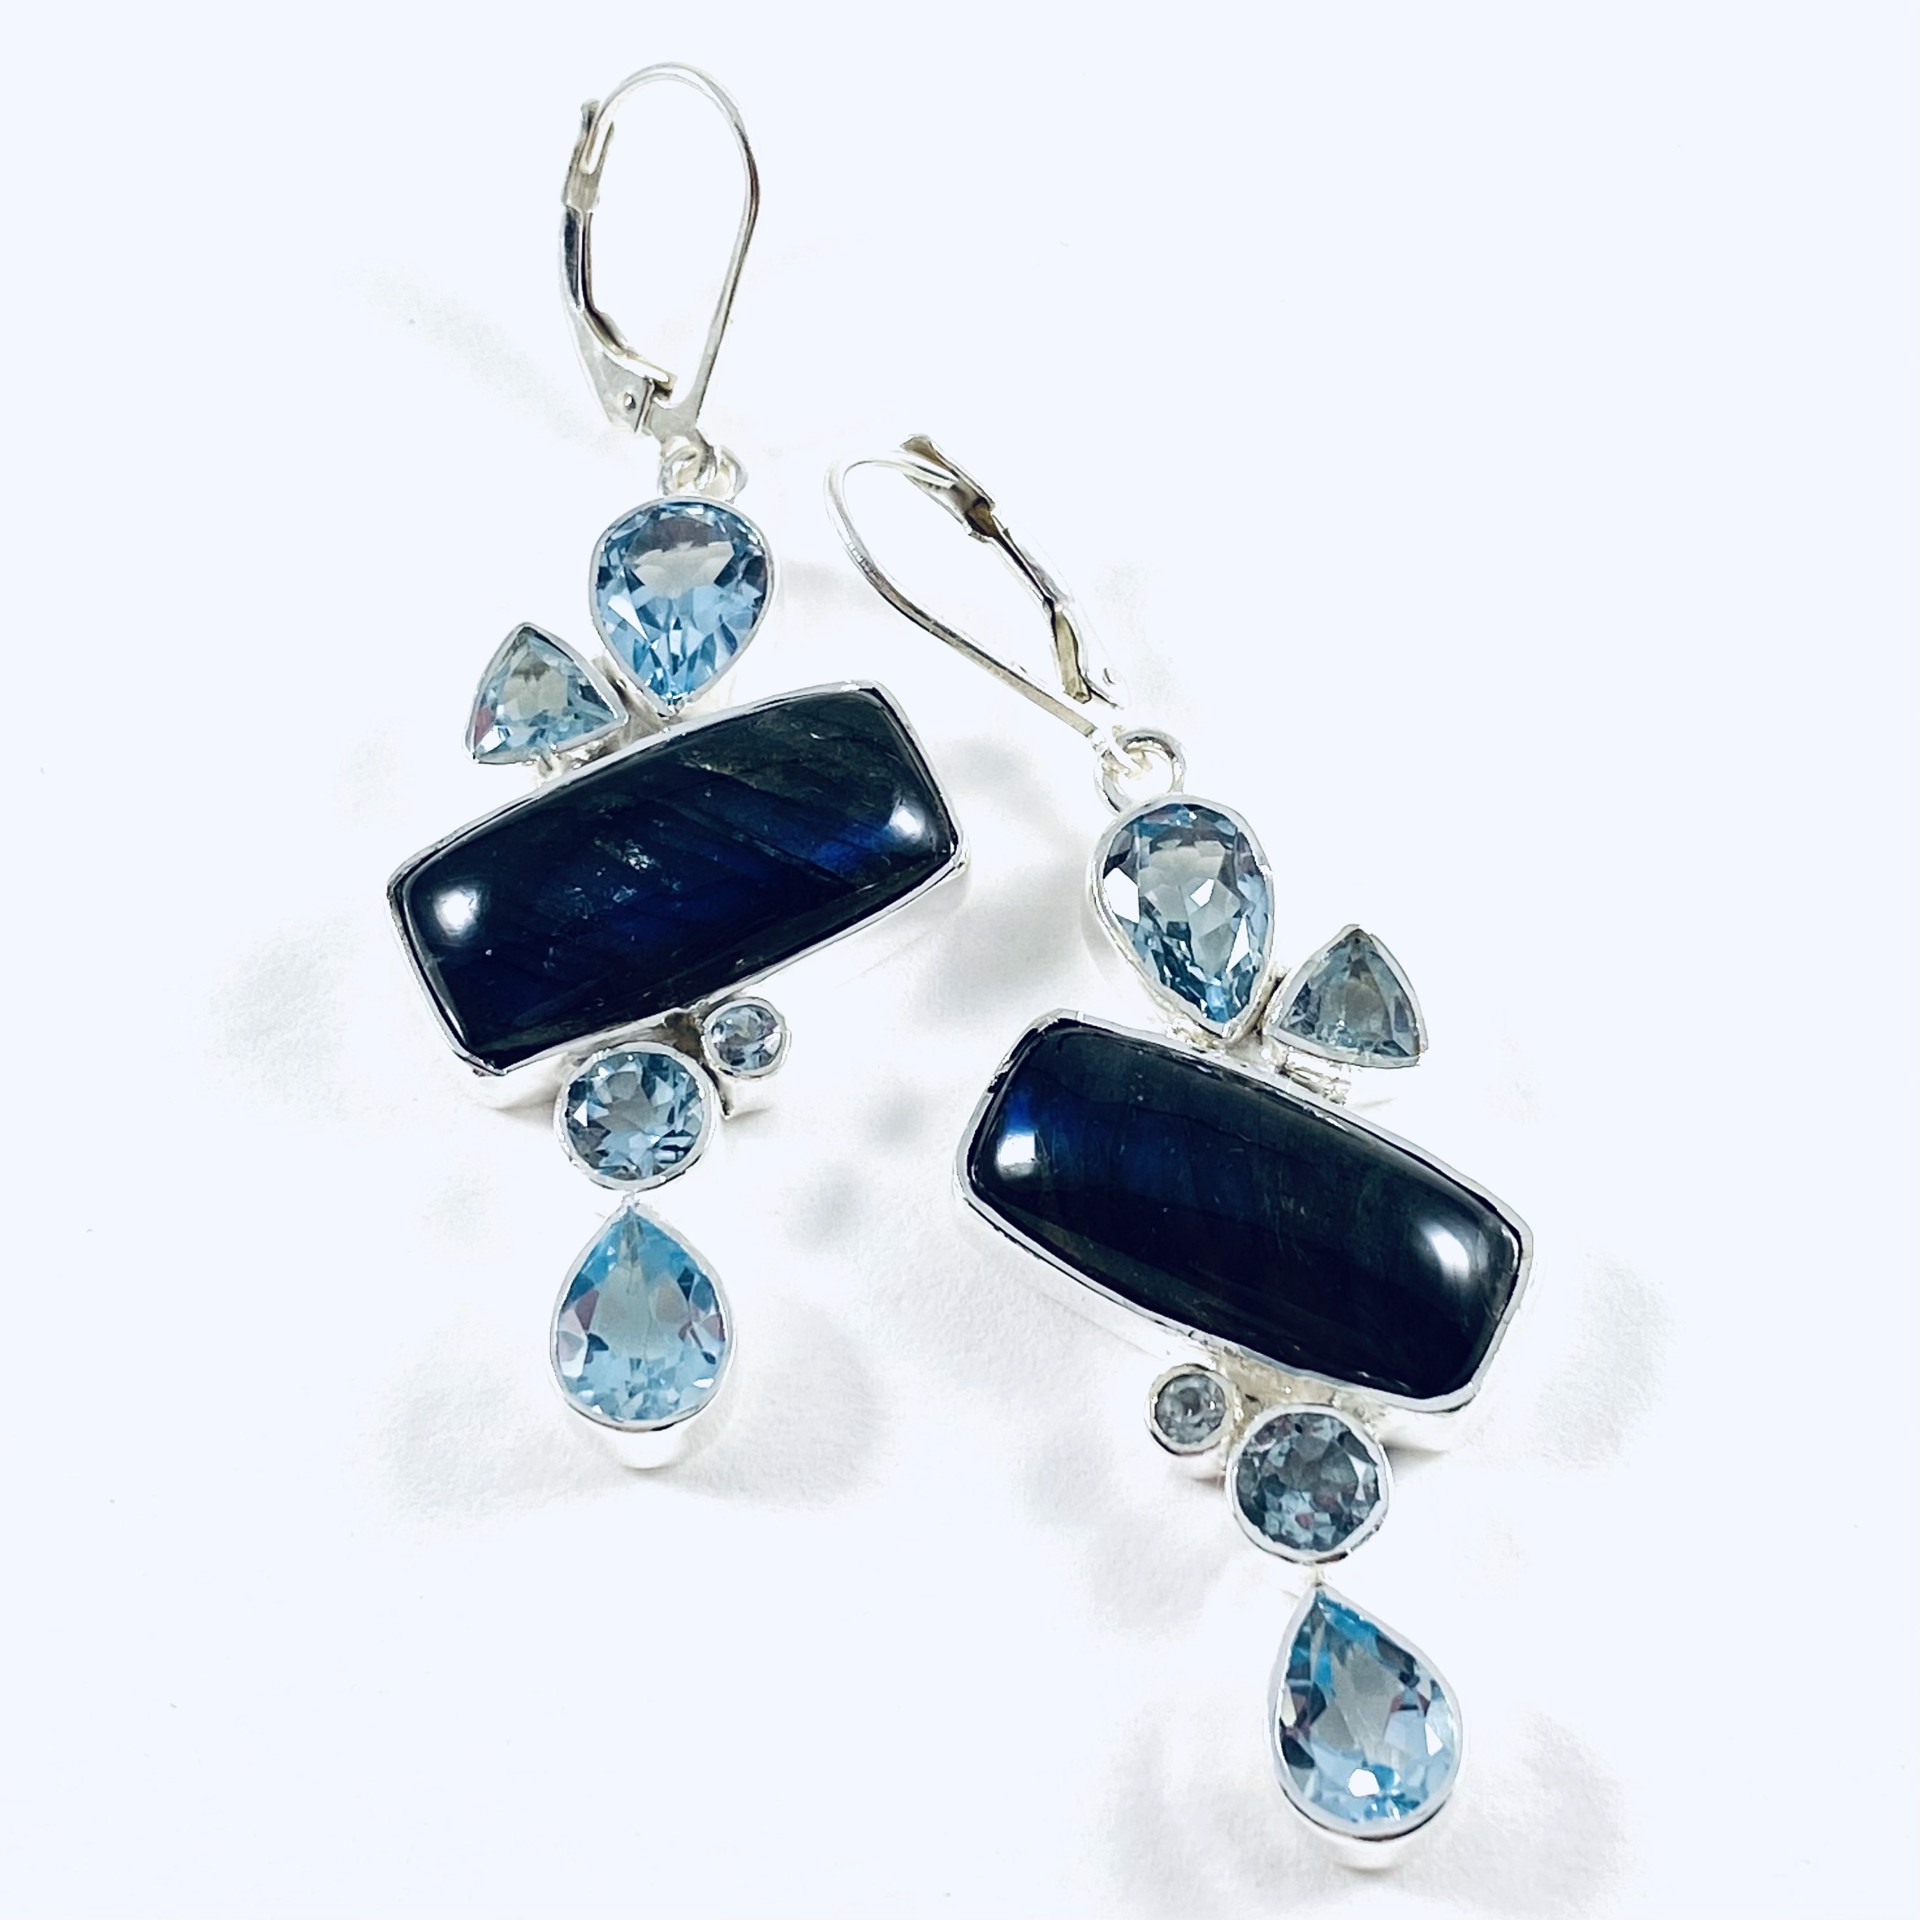 MON21-2A Labradorite and Blue Topaz Earrings, french wire clasp by Monica Mehta